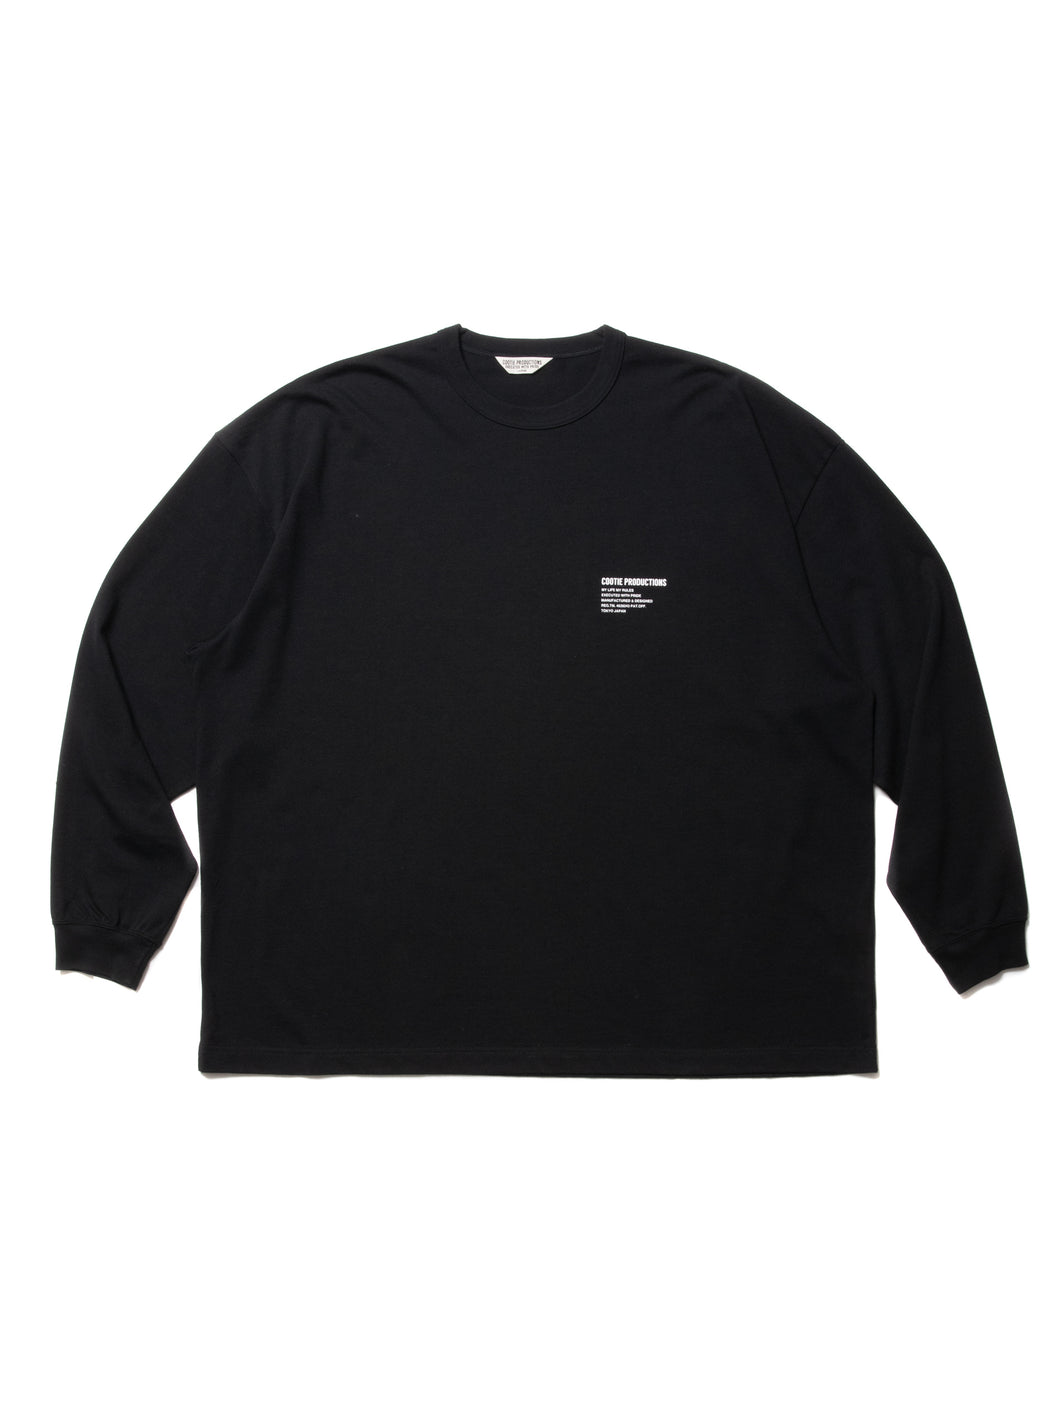 C/R Smooth Jersey L/S Tee